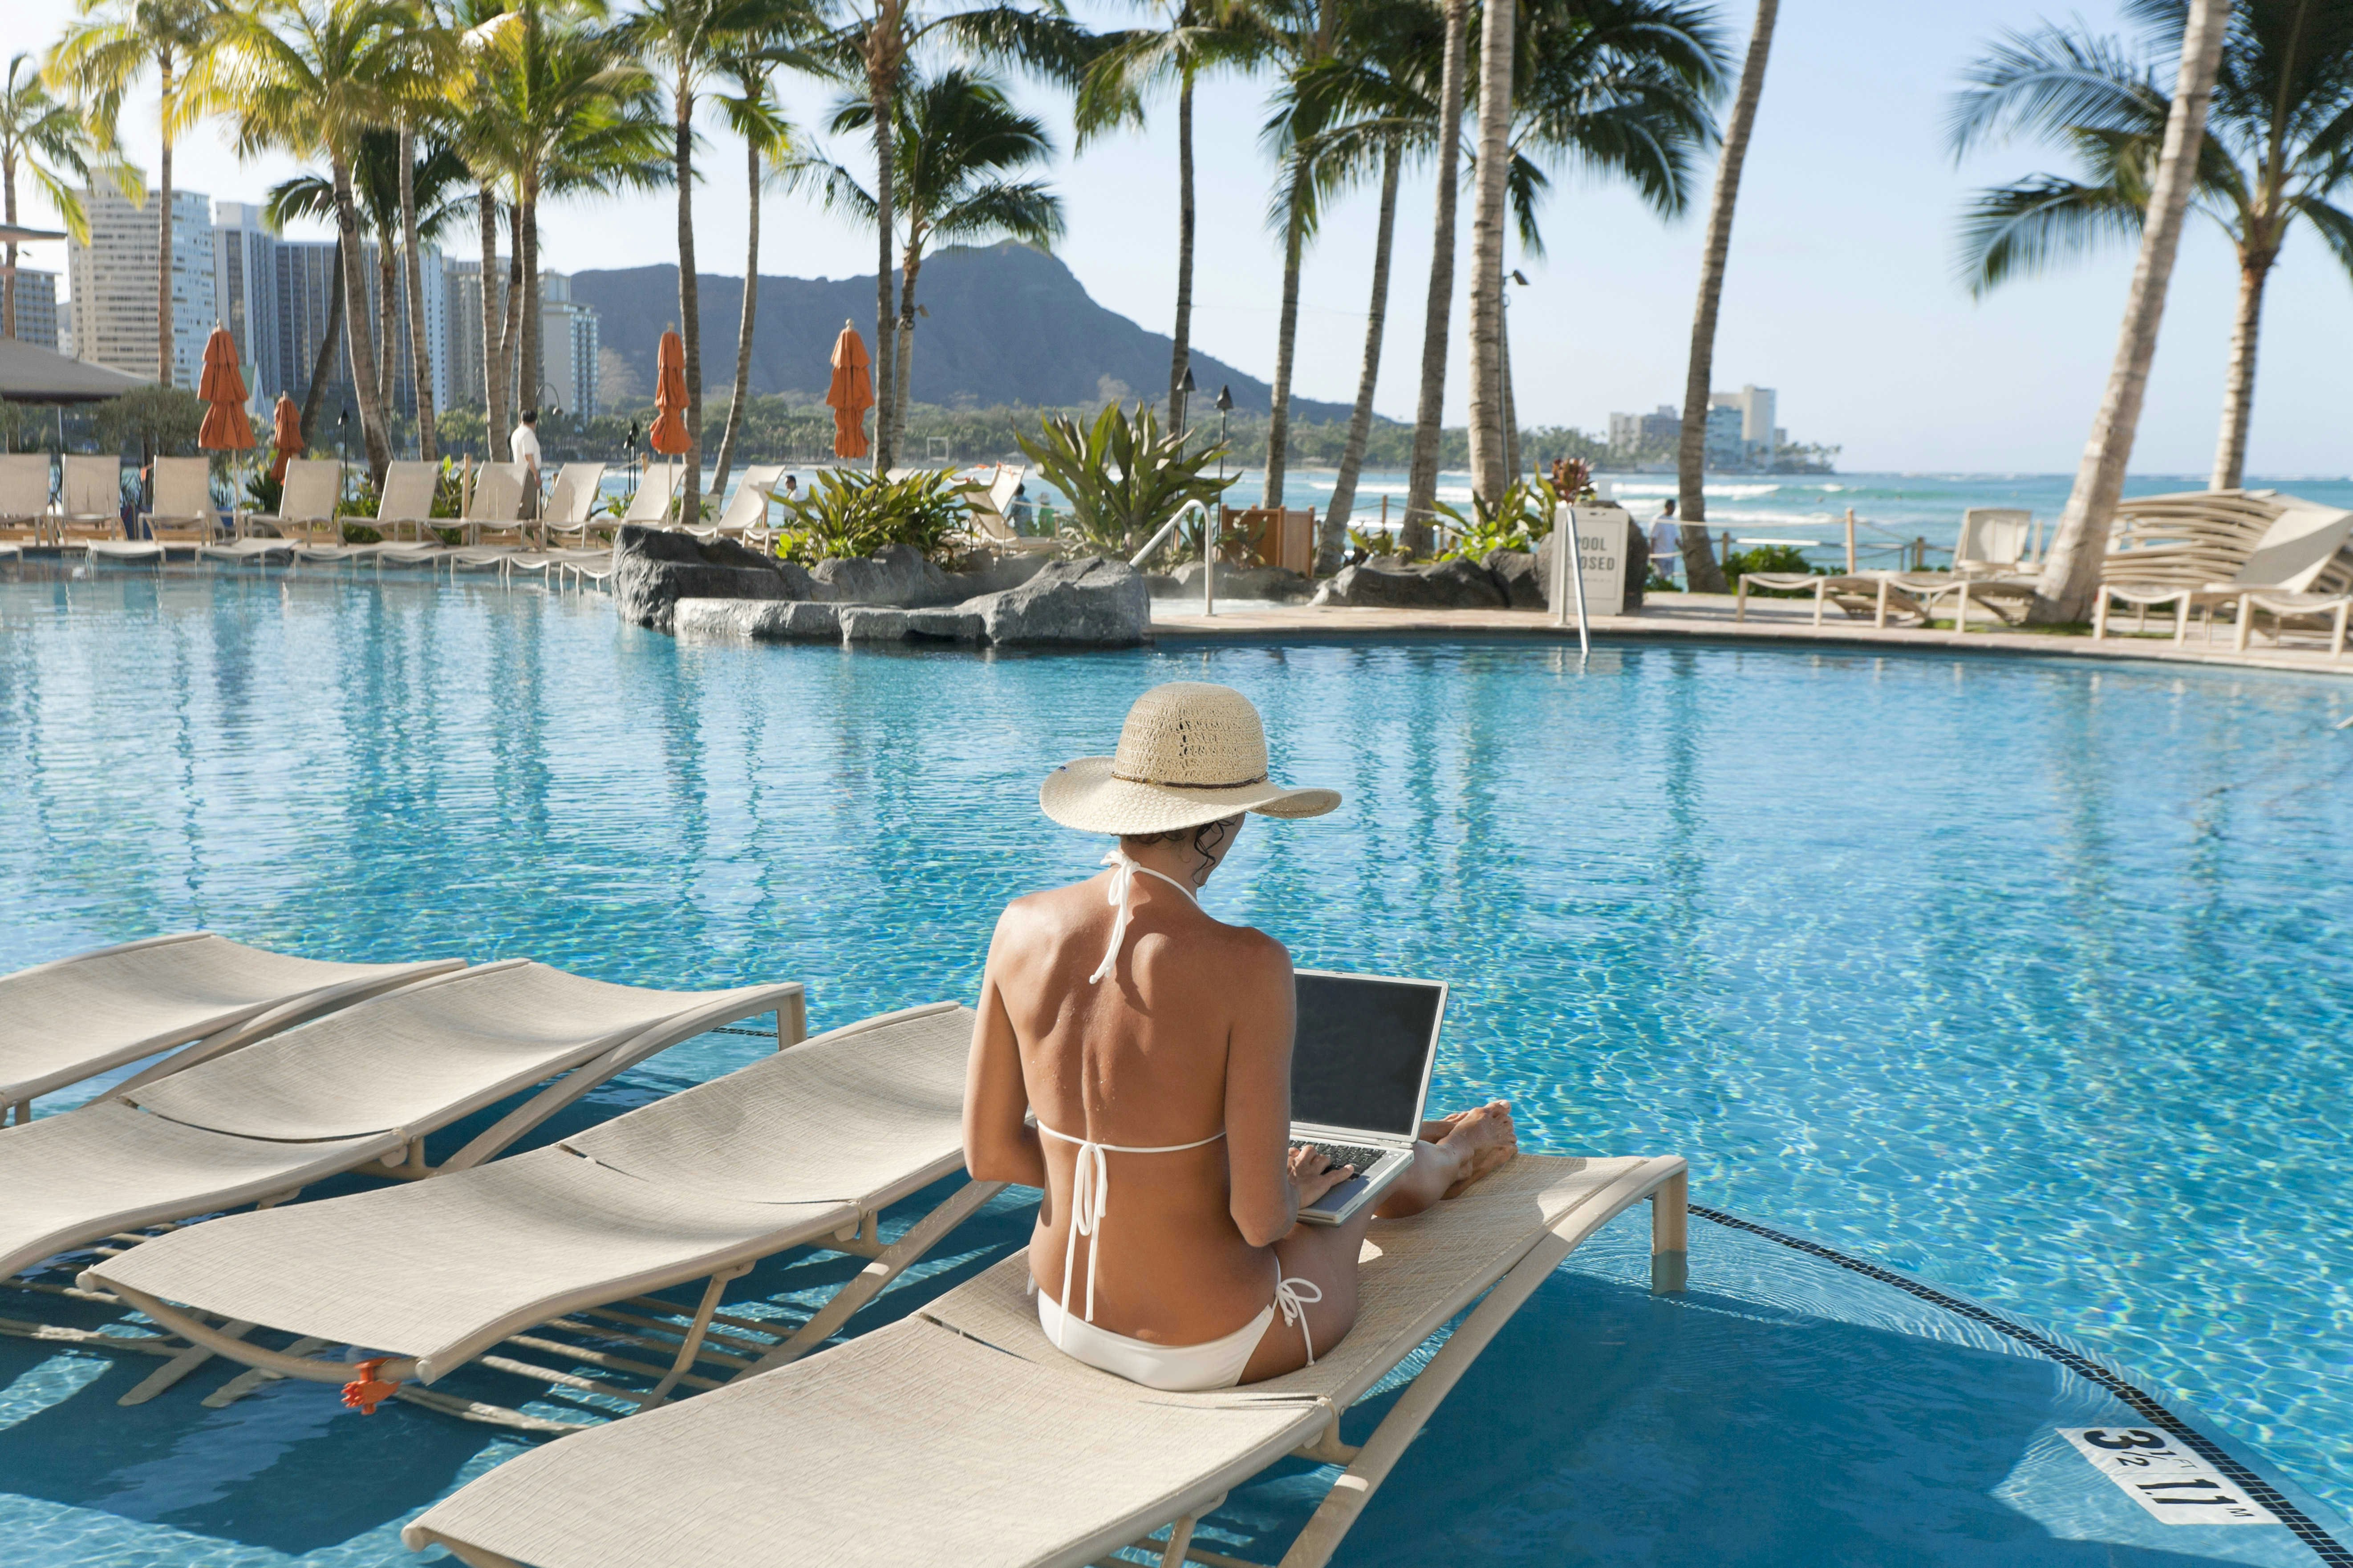 A woman in a bikini on a laptop by the pool